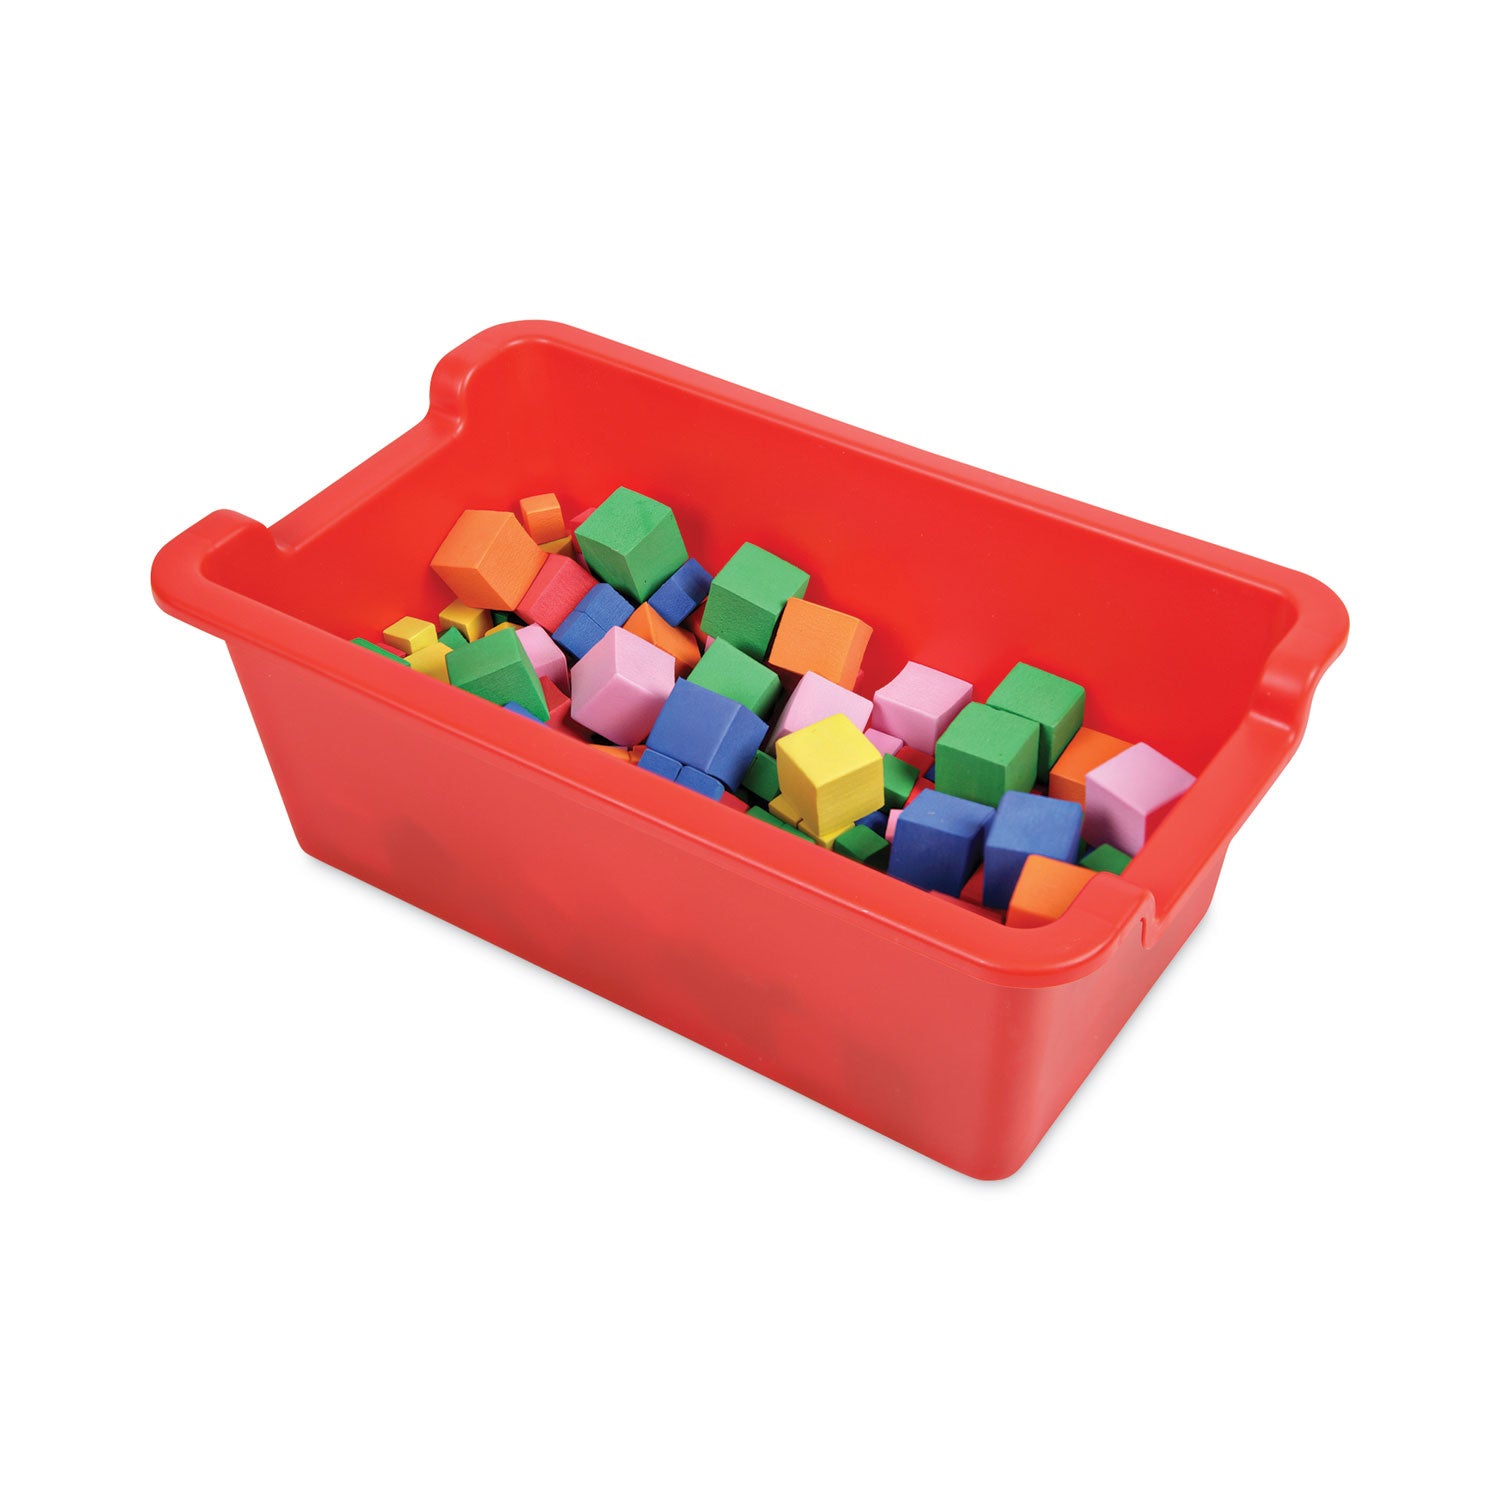 antimicrobial-rectangle-storage-bin-red_def39510red - 3